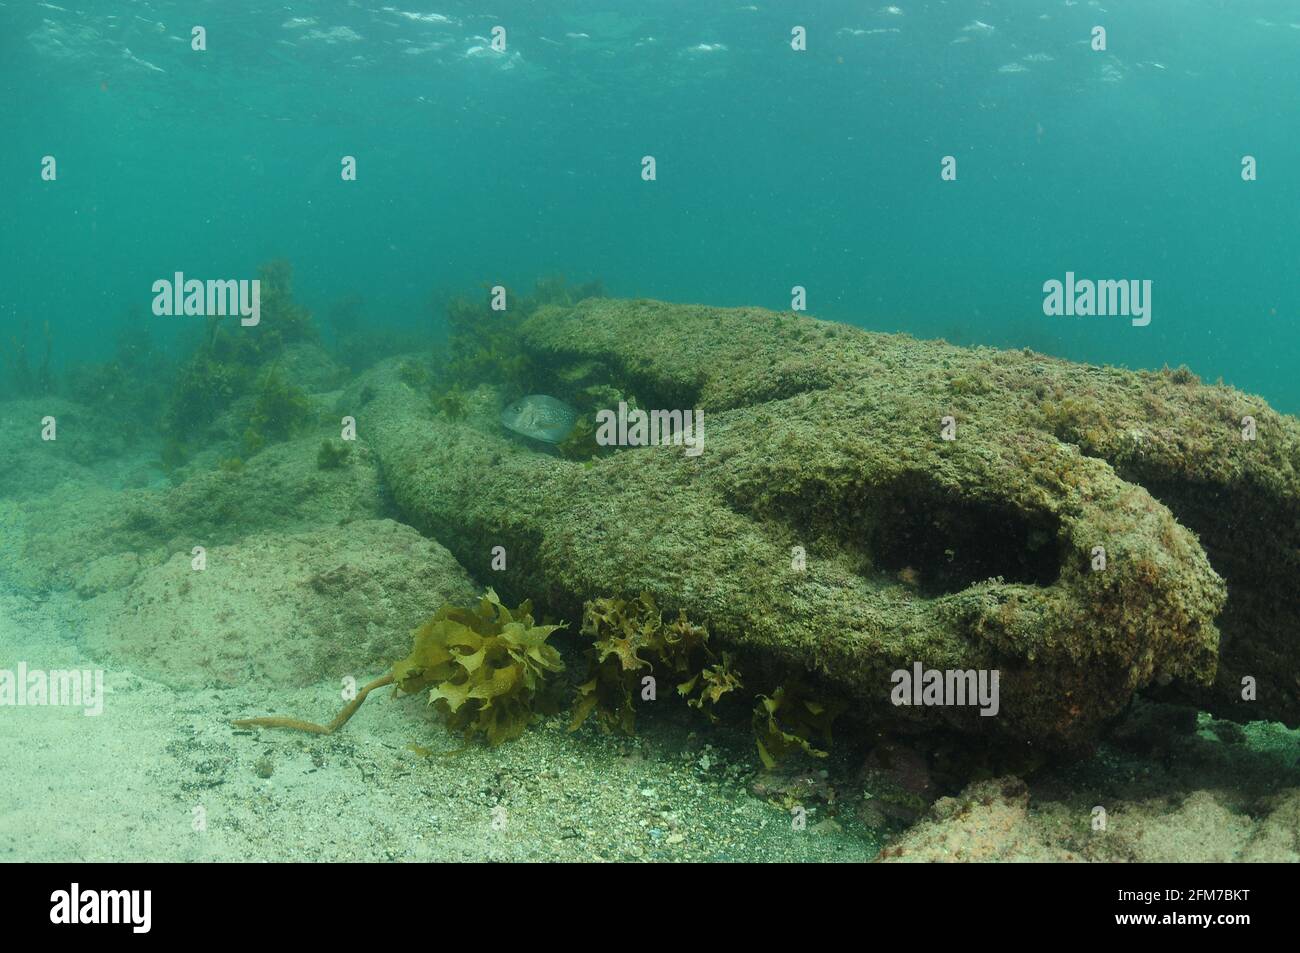 Remnants of large tree trunk submerged in shallow water providing fish with hiding spots. Stock Photo